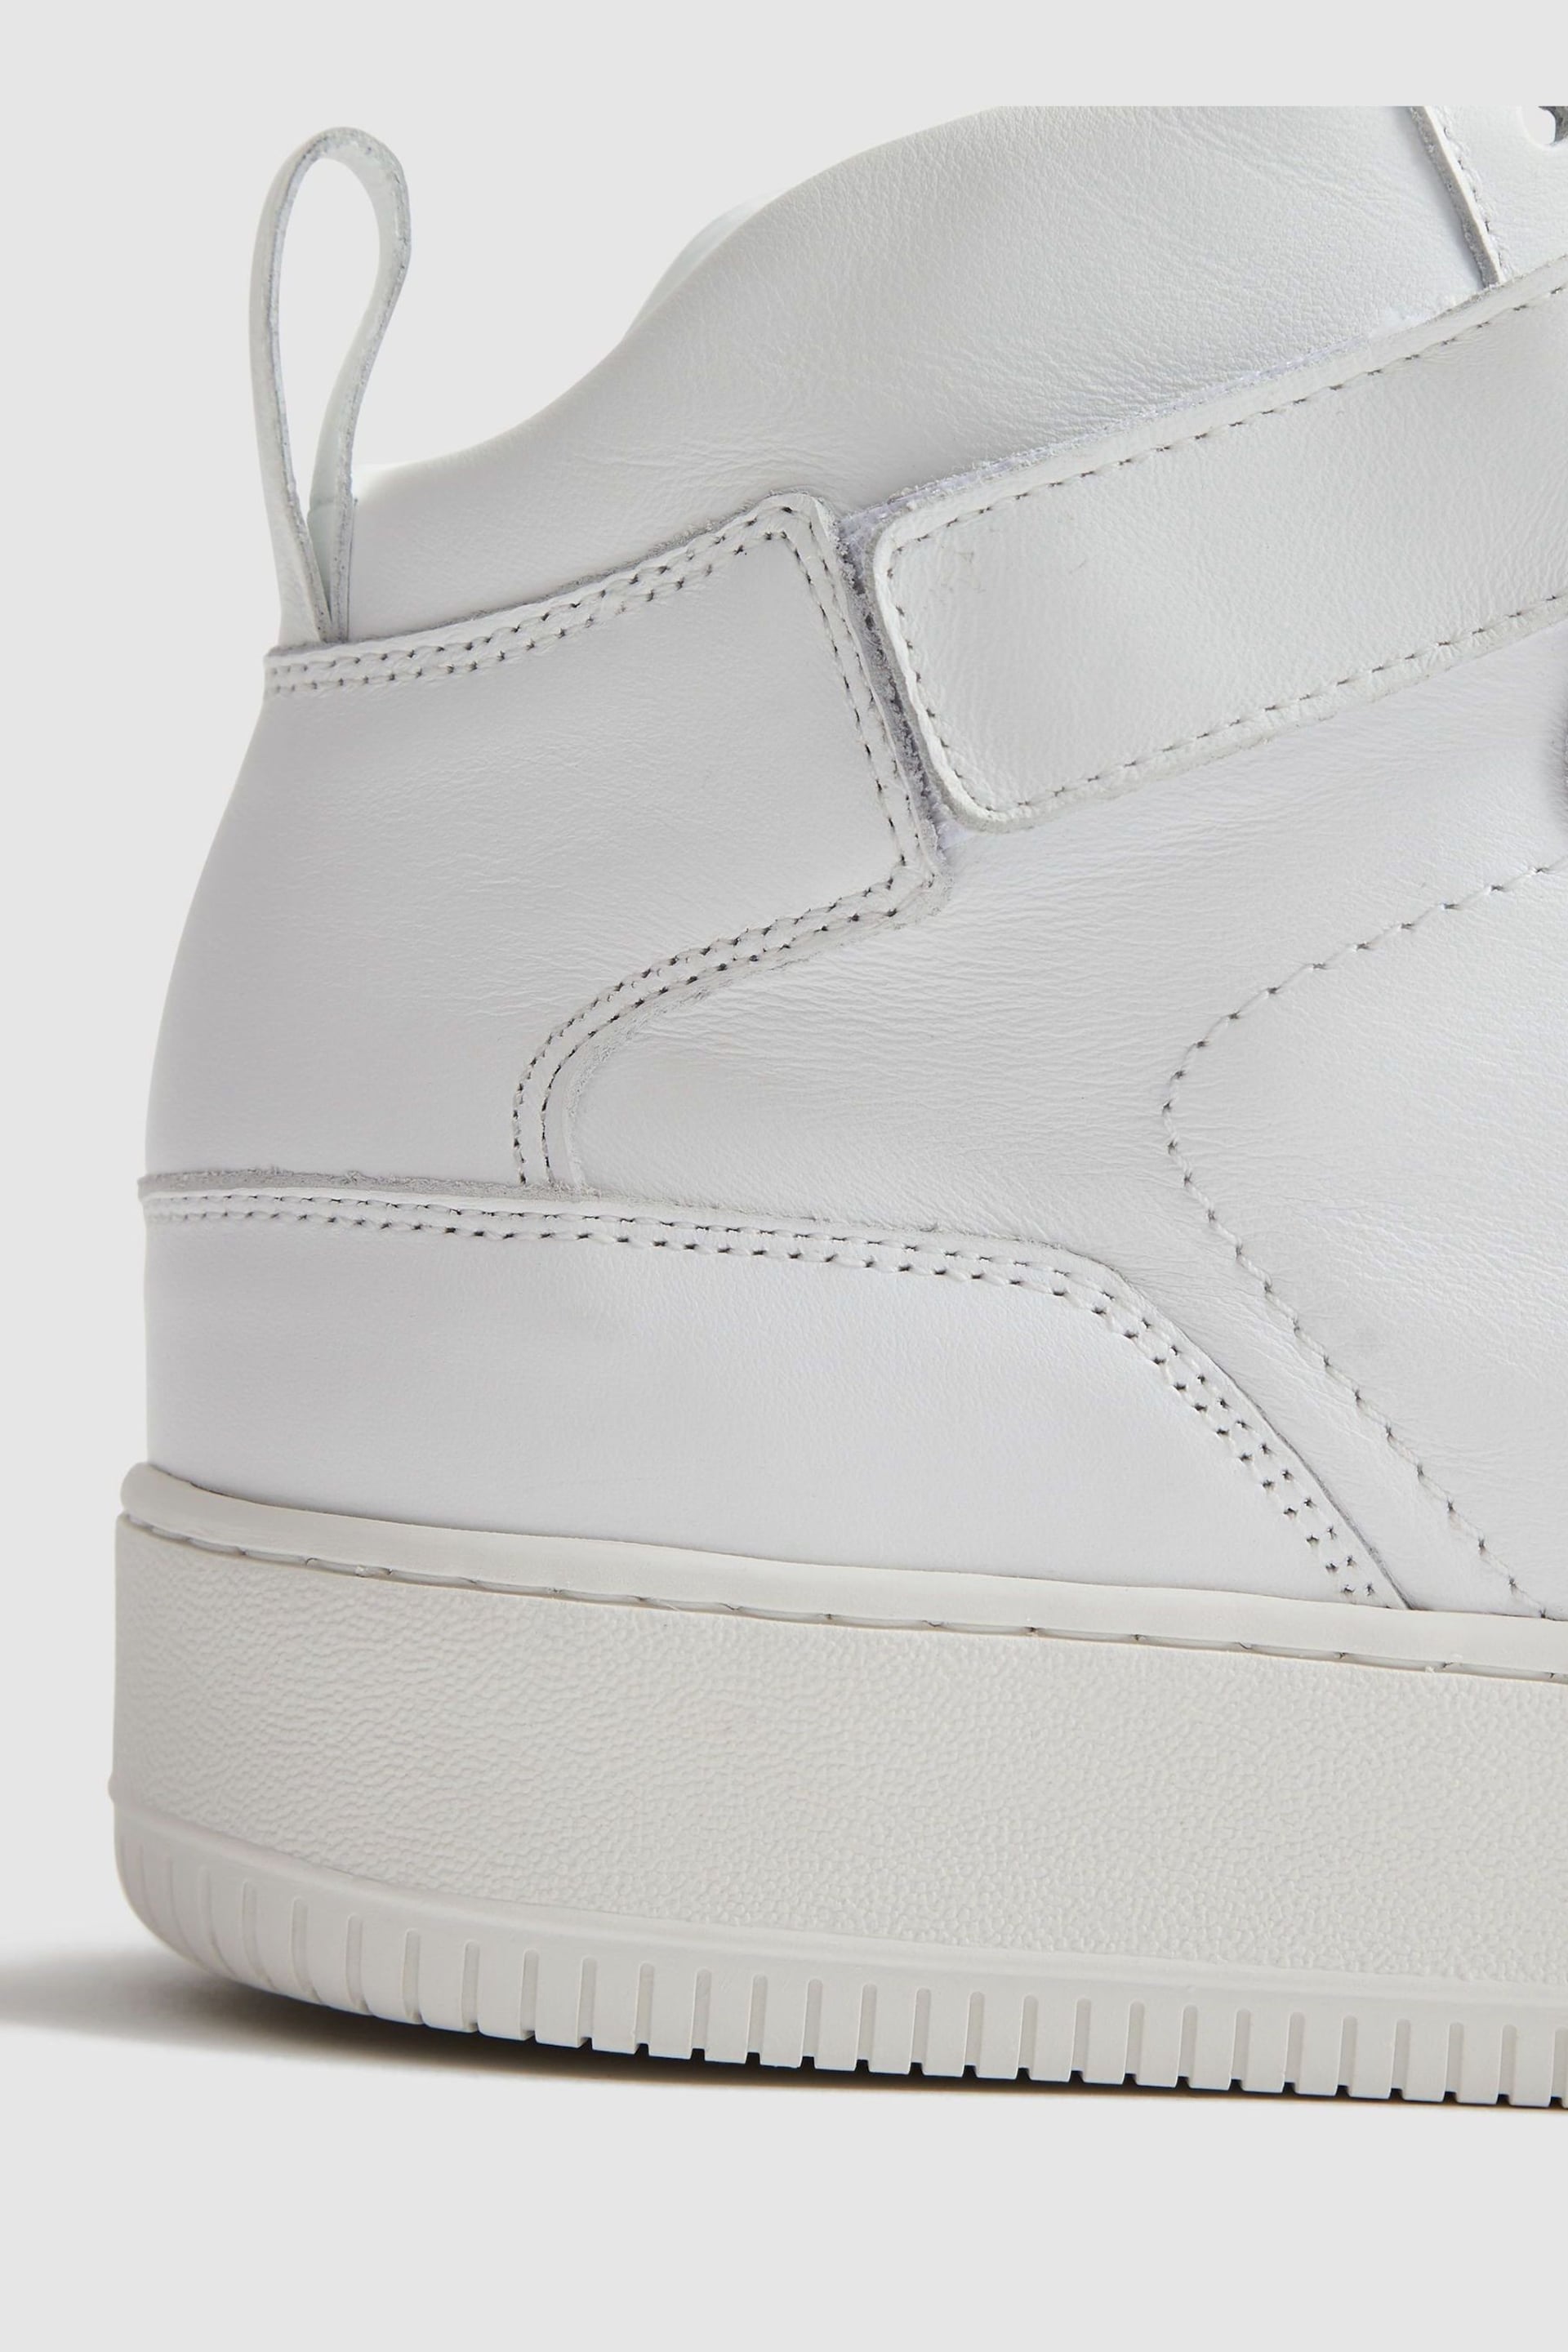 Reiss White Aira High Top Leather Trainers - Image 5 of 7